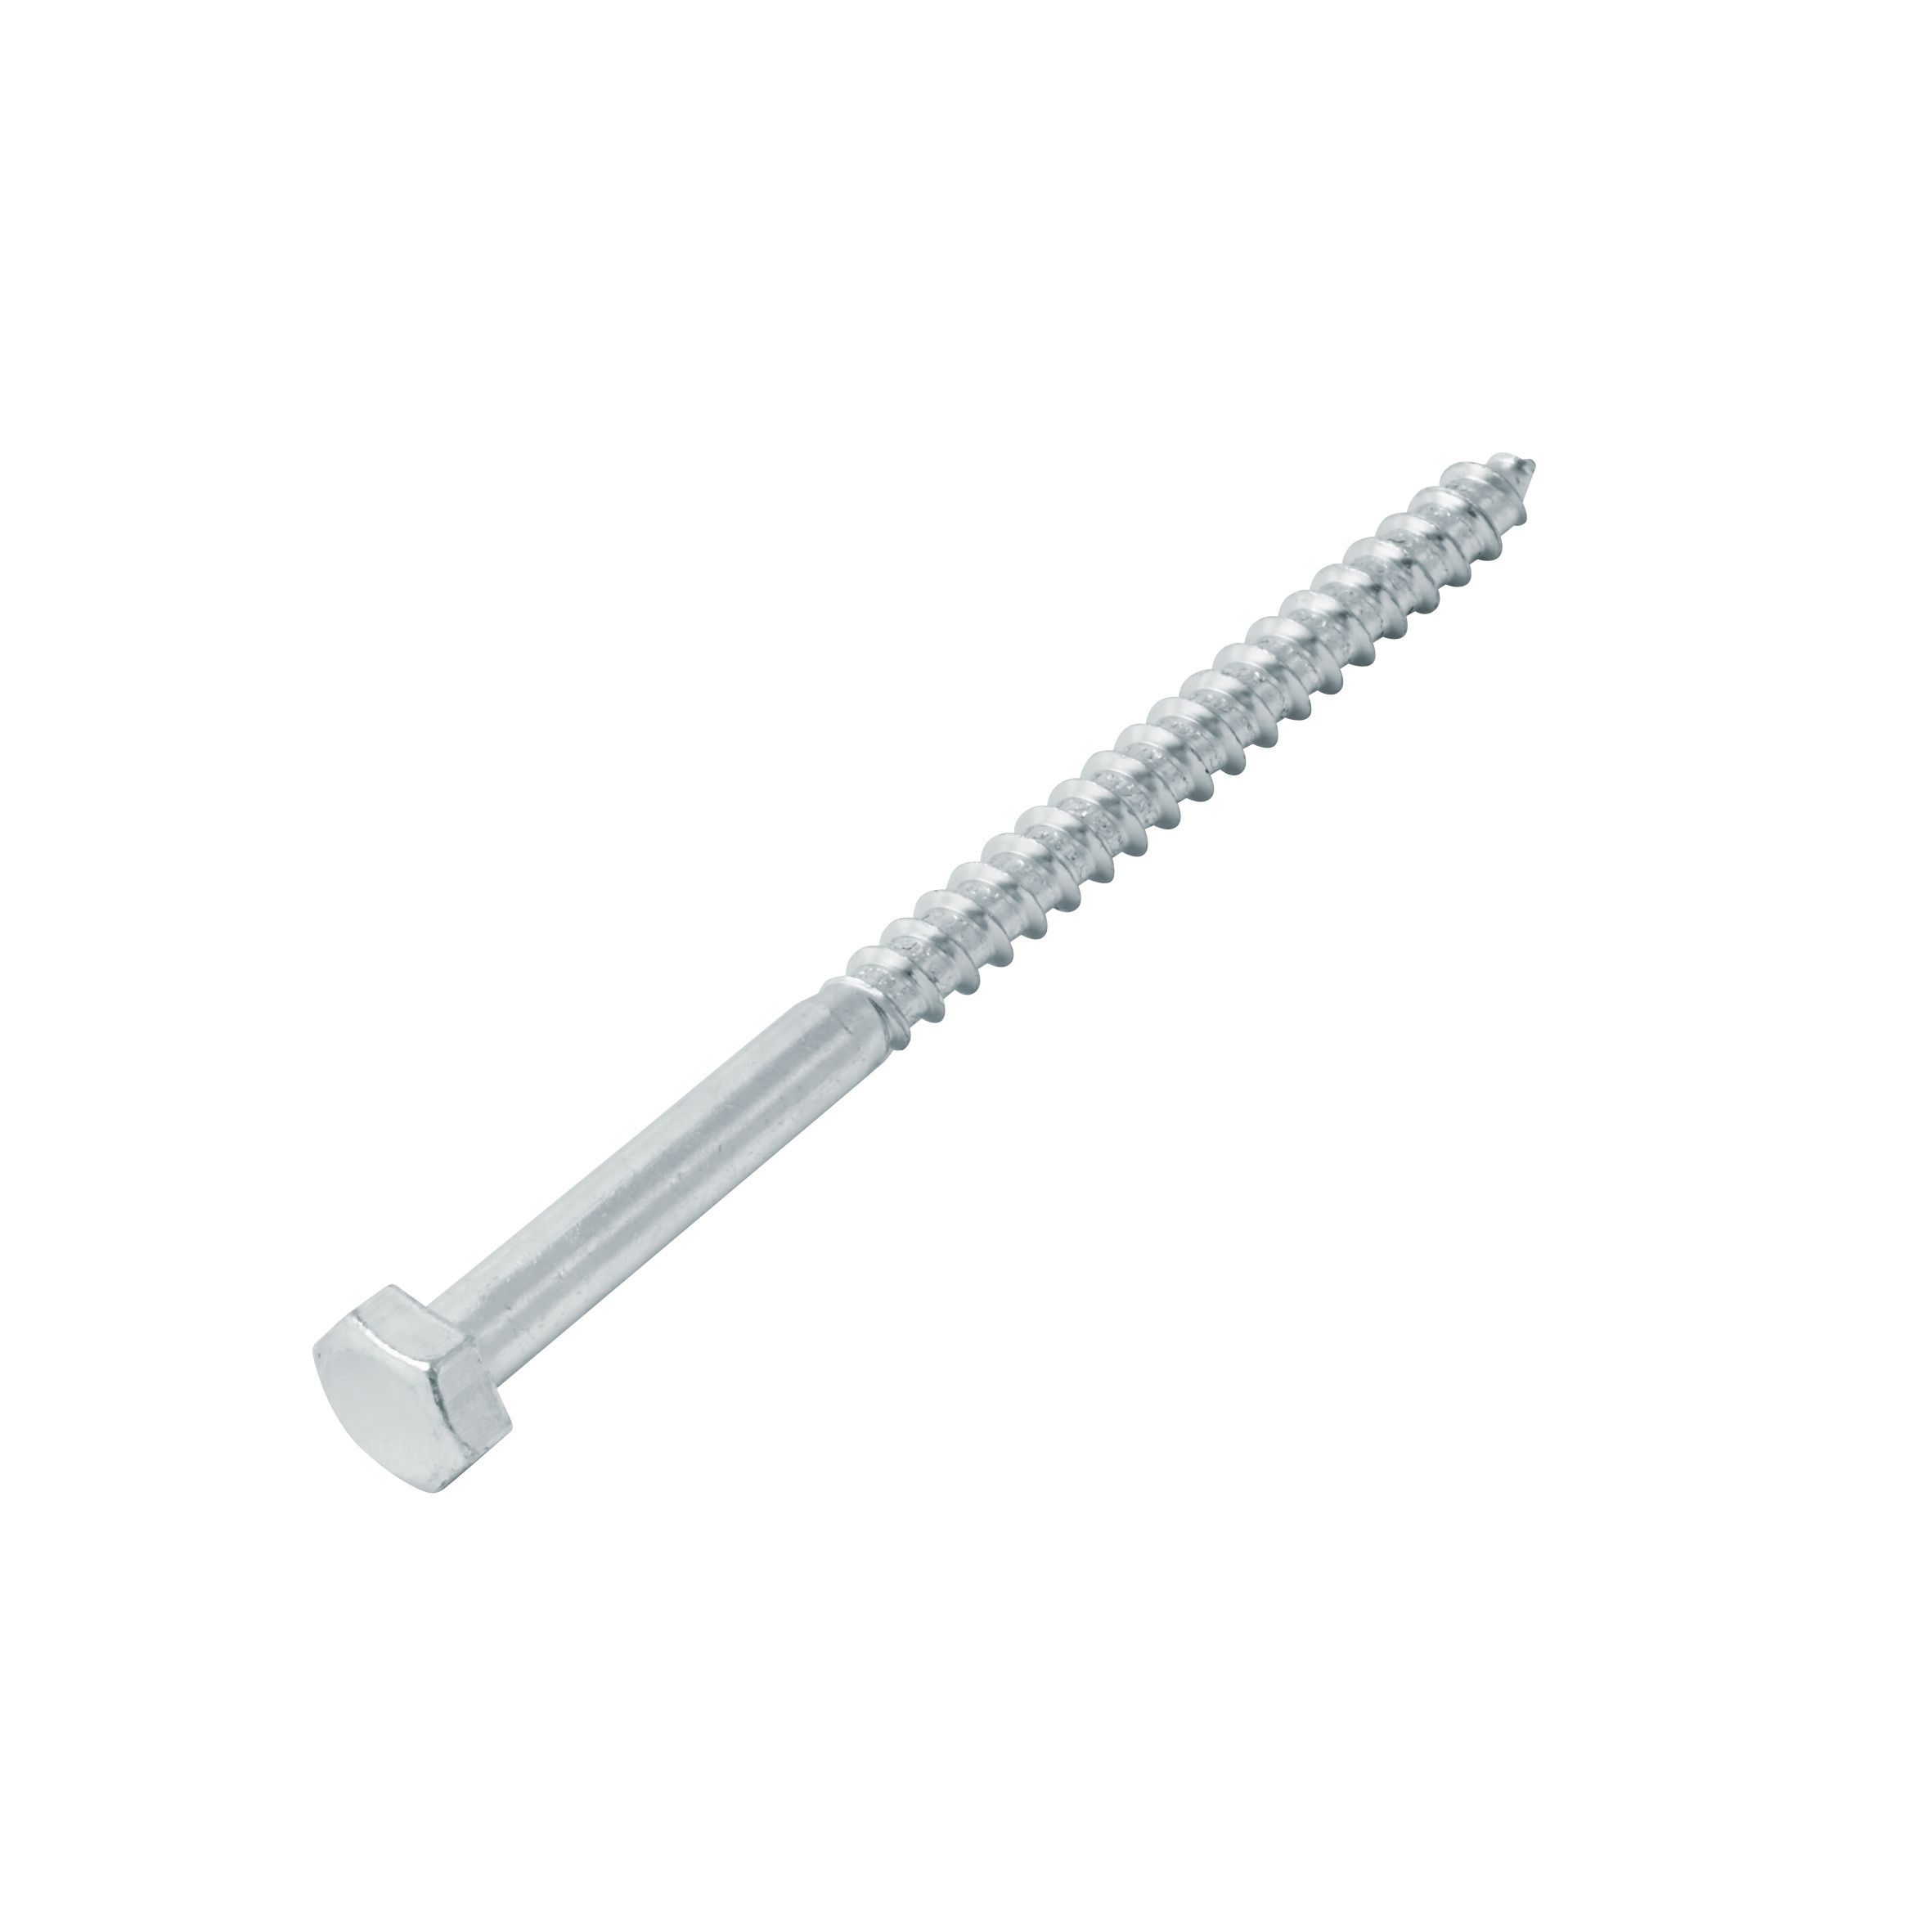 Image of Wickes Coach Screws - M6 x 90mm Pack of 10